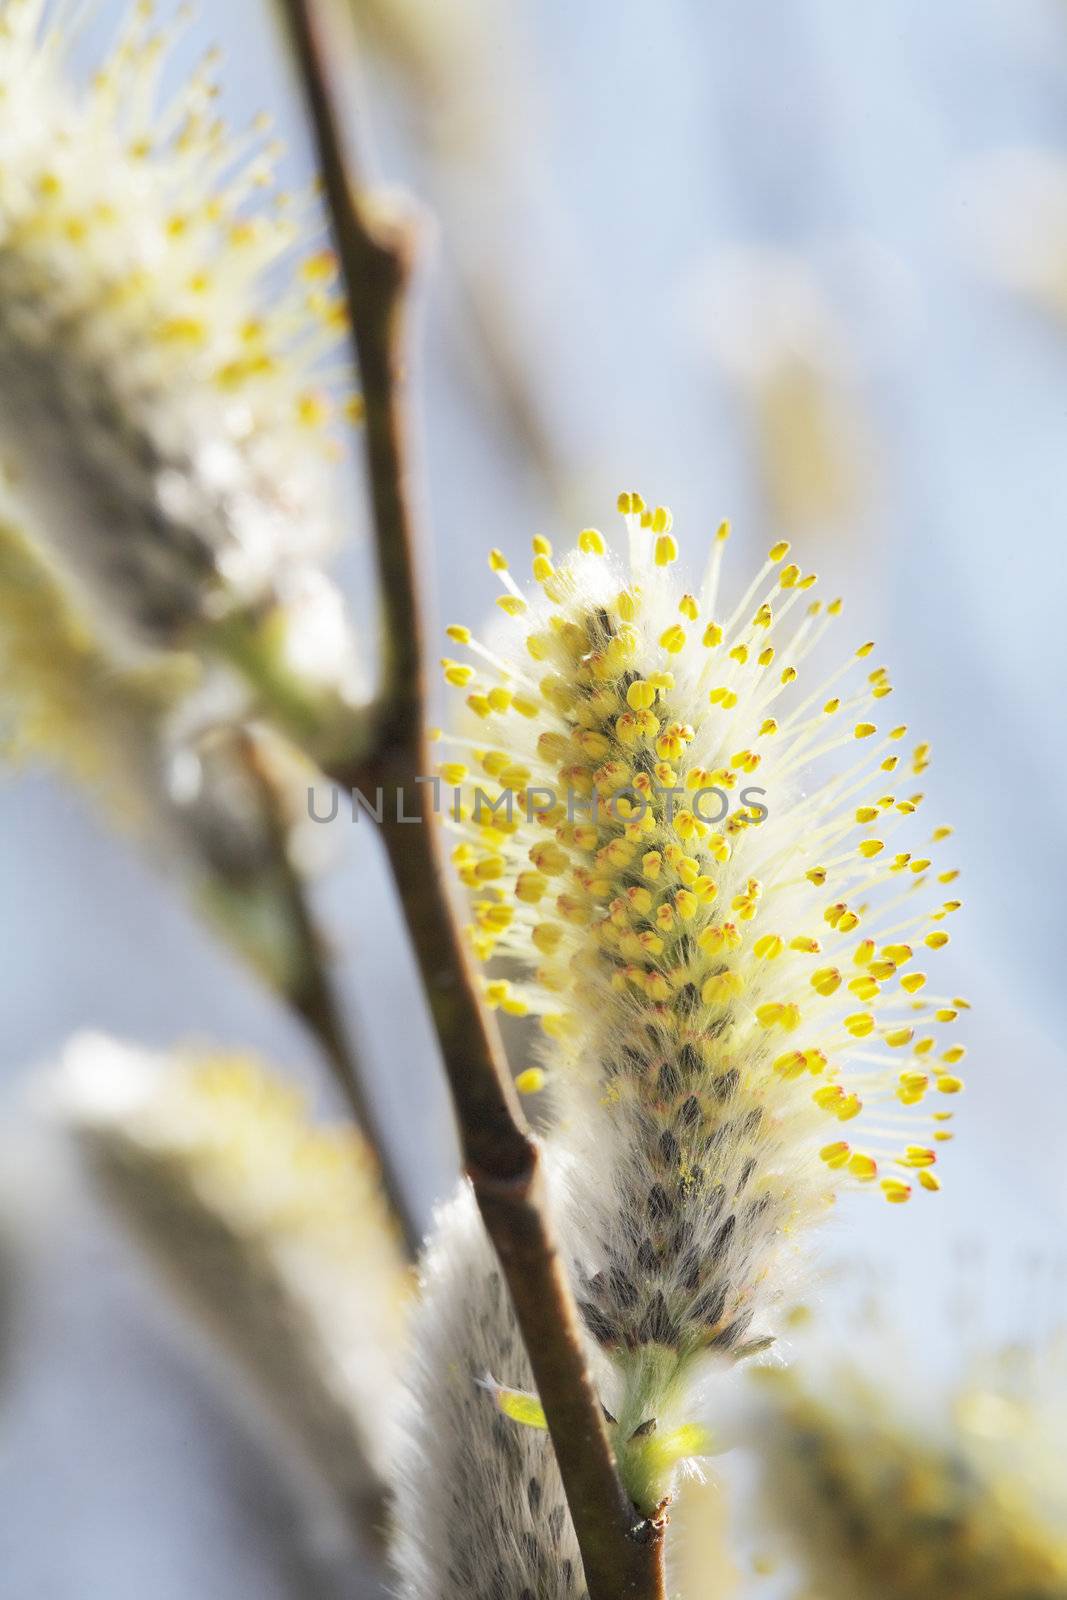 Spring time willow catkins aments on a willow.